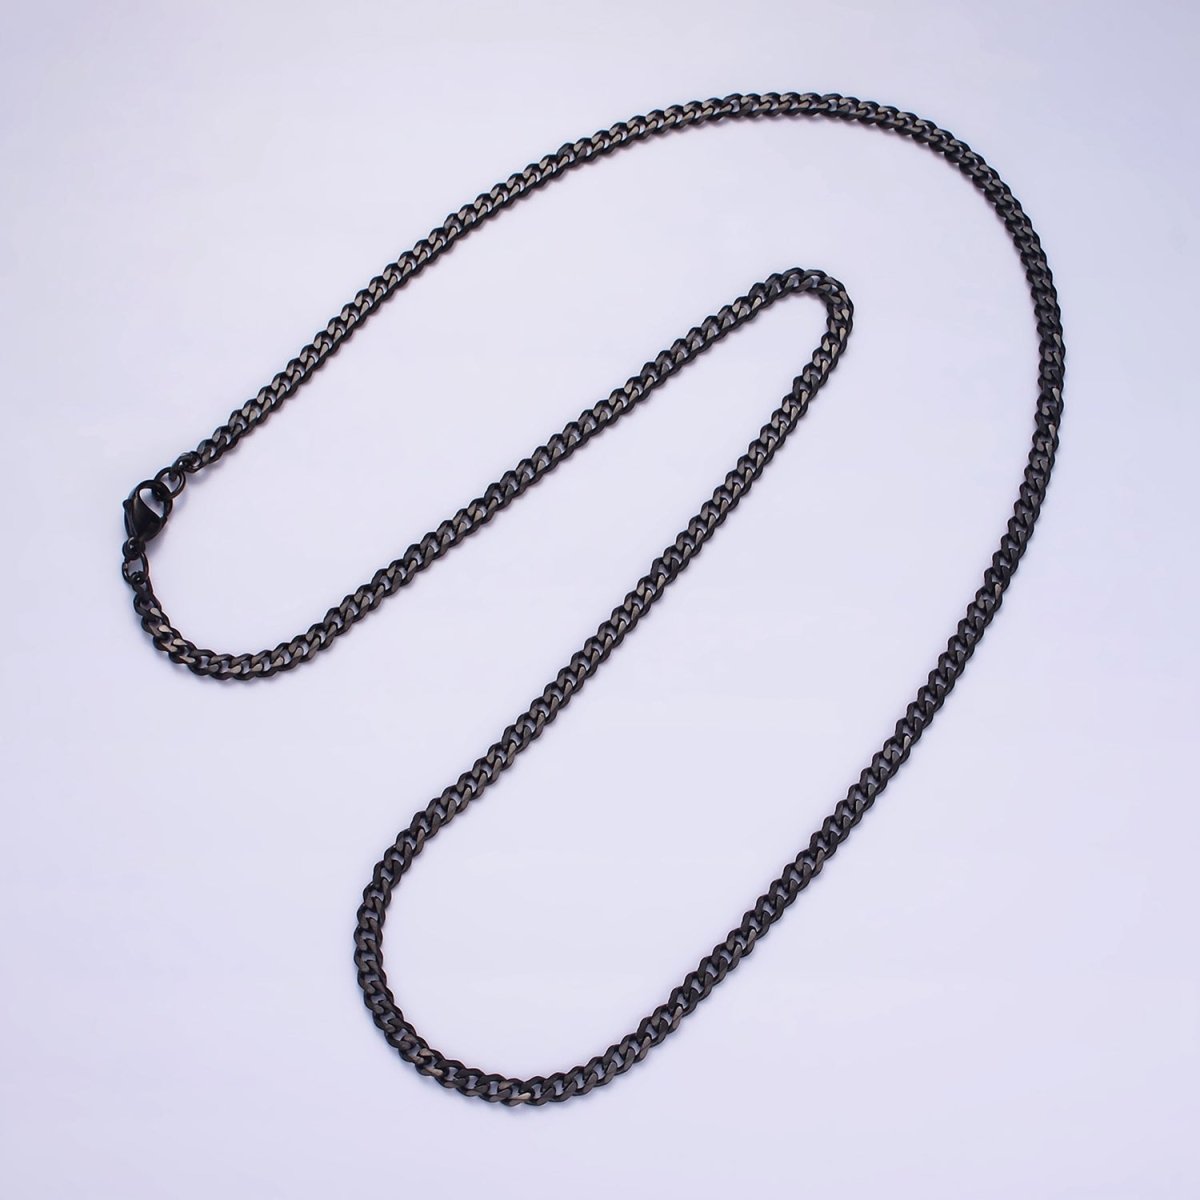 Stainless Steel 3.4 mm Curb Chain | Silver Curb Necklace | Steel Curb Chain | Men's Necklace | Men's Stainless Steel Chain | Tarnish Resistant | WA-2147 to WA-2150 Clearance Pricing - DLUXCA